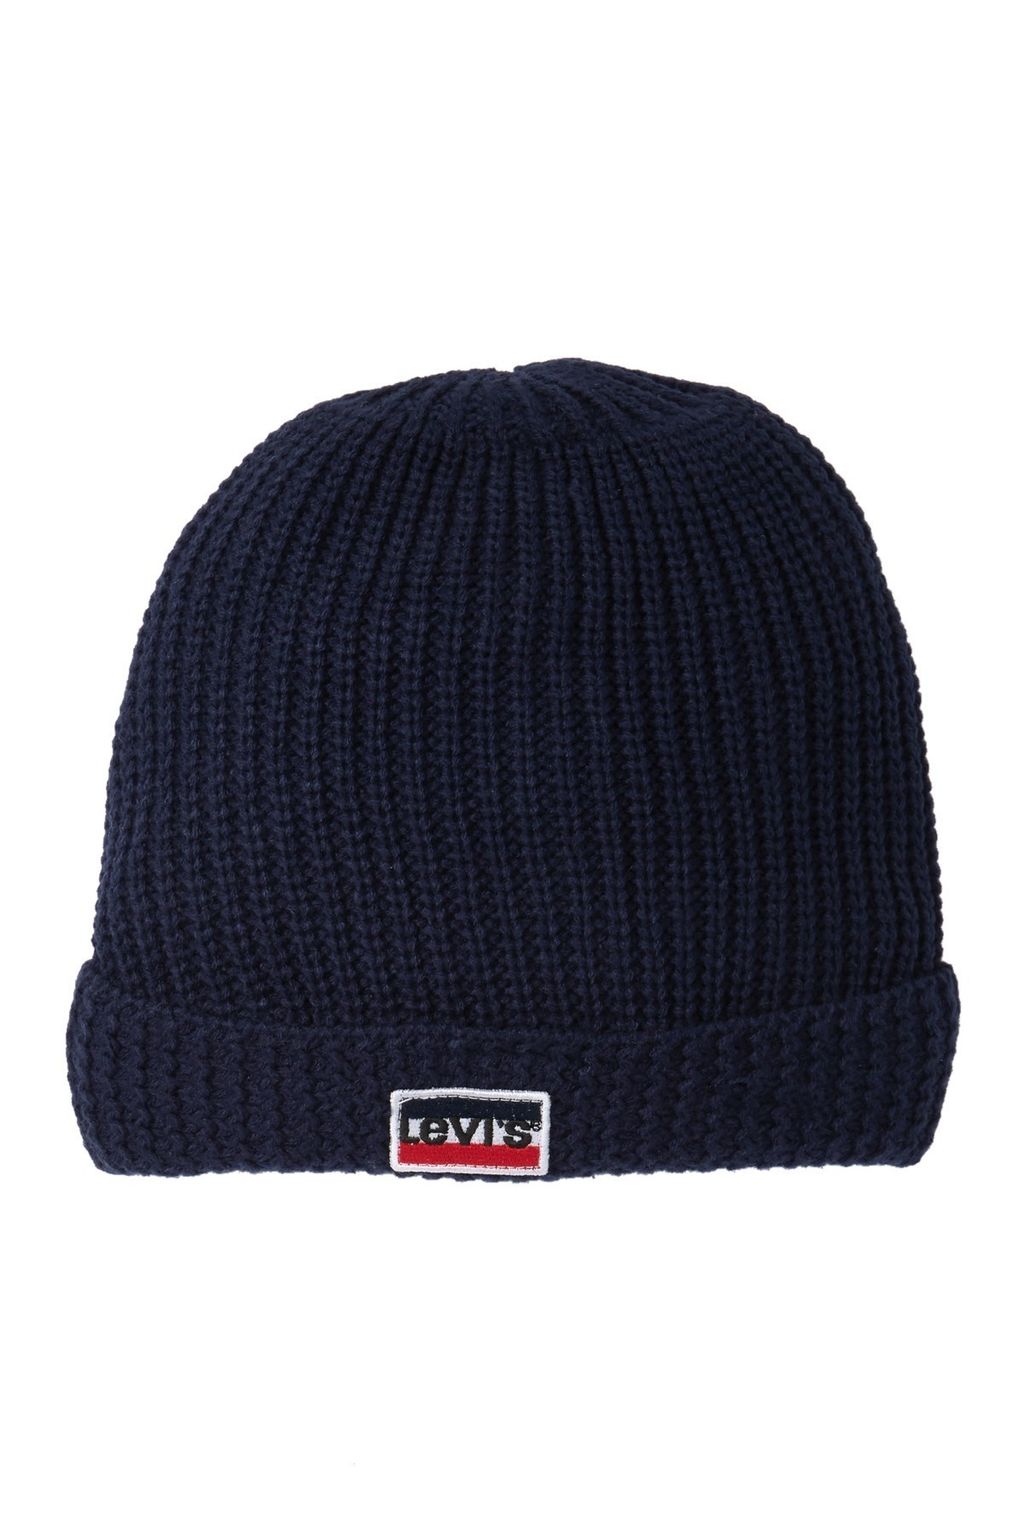 levis Textured Cuff Faux Fur Lined Beanie 1